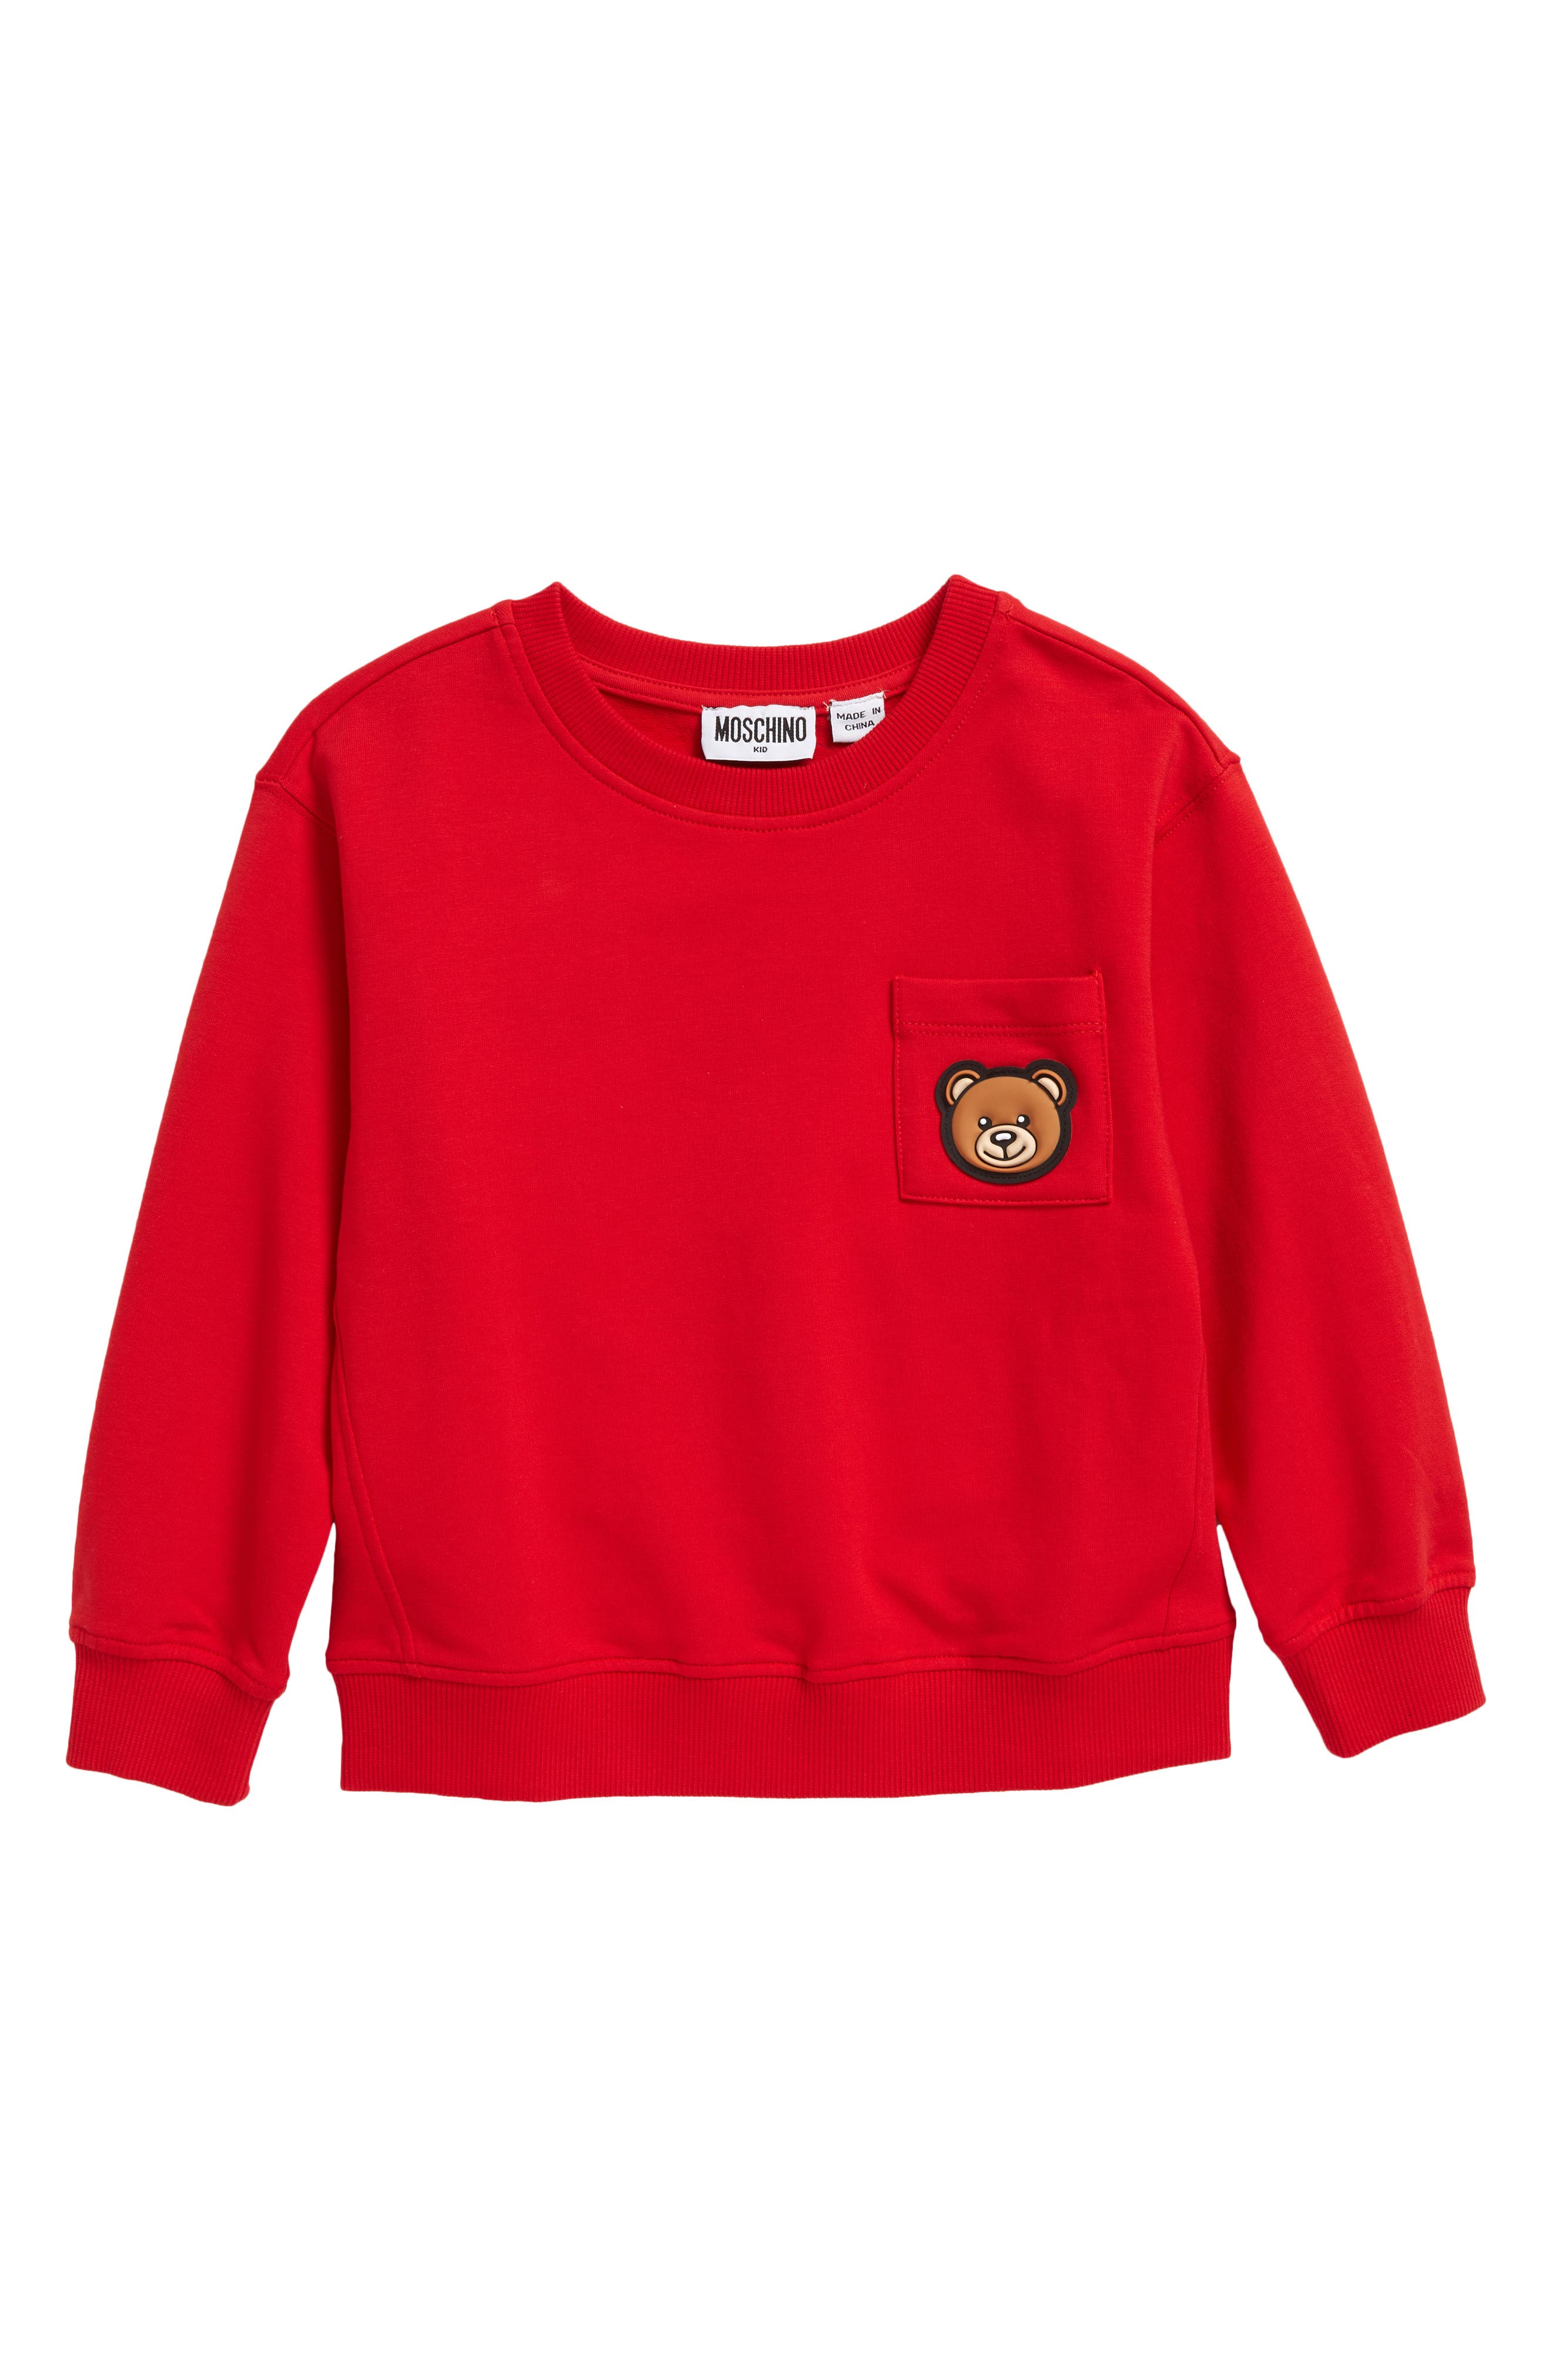 Moschino Kids' Guitar Teddy Bear Graphic Sweatshirt in Flame Red at Nordstrom, Size 6Y Us